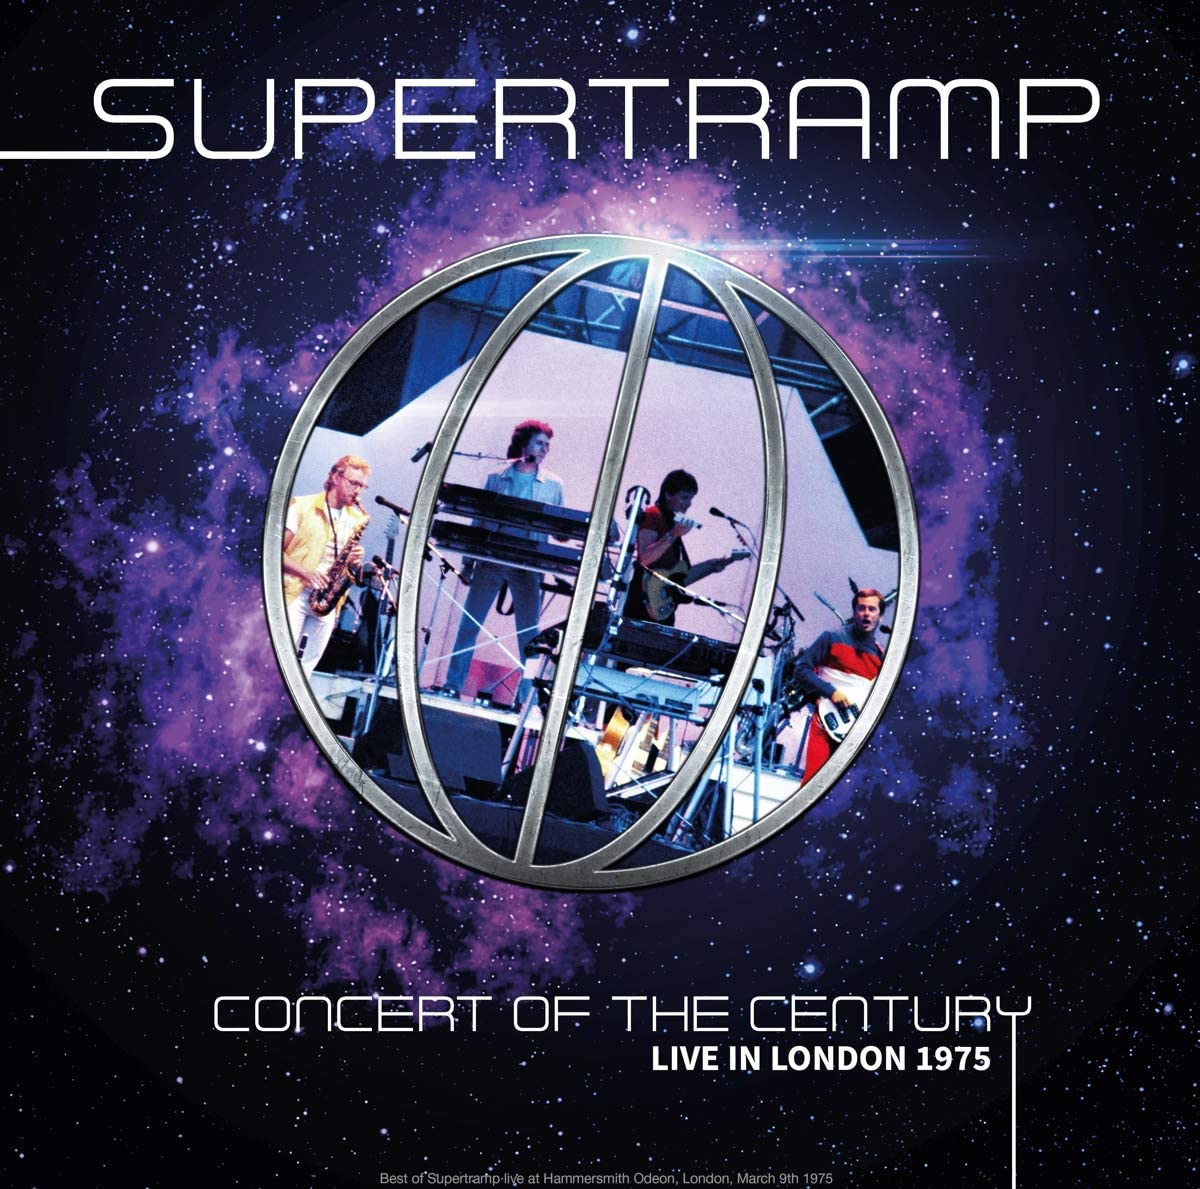 CONCERT OF THE CENTURY LIVE IN LONDON 19